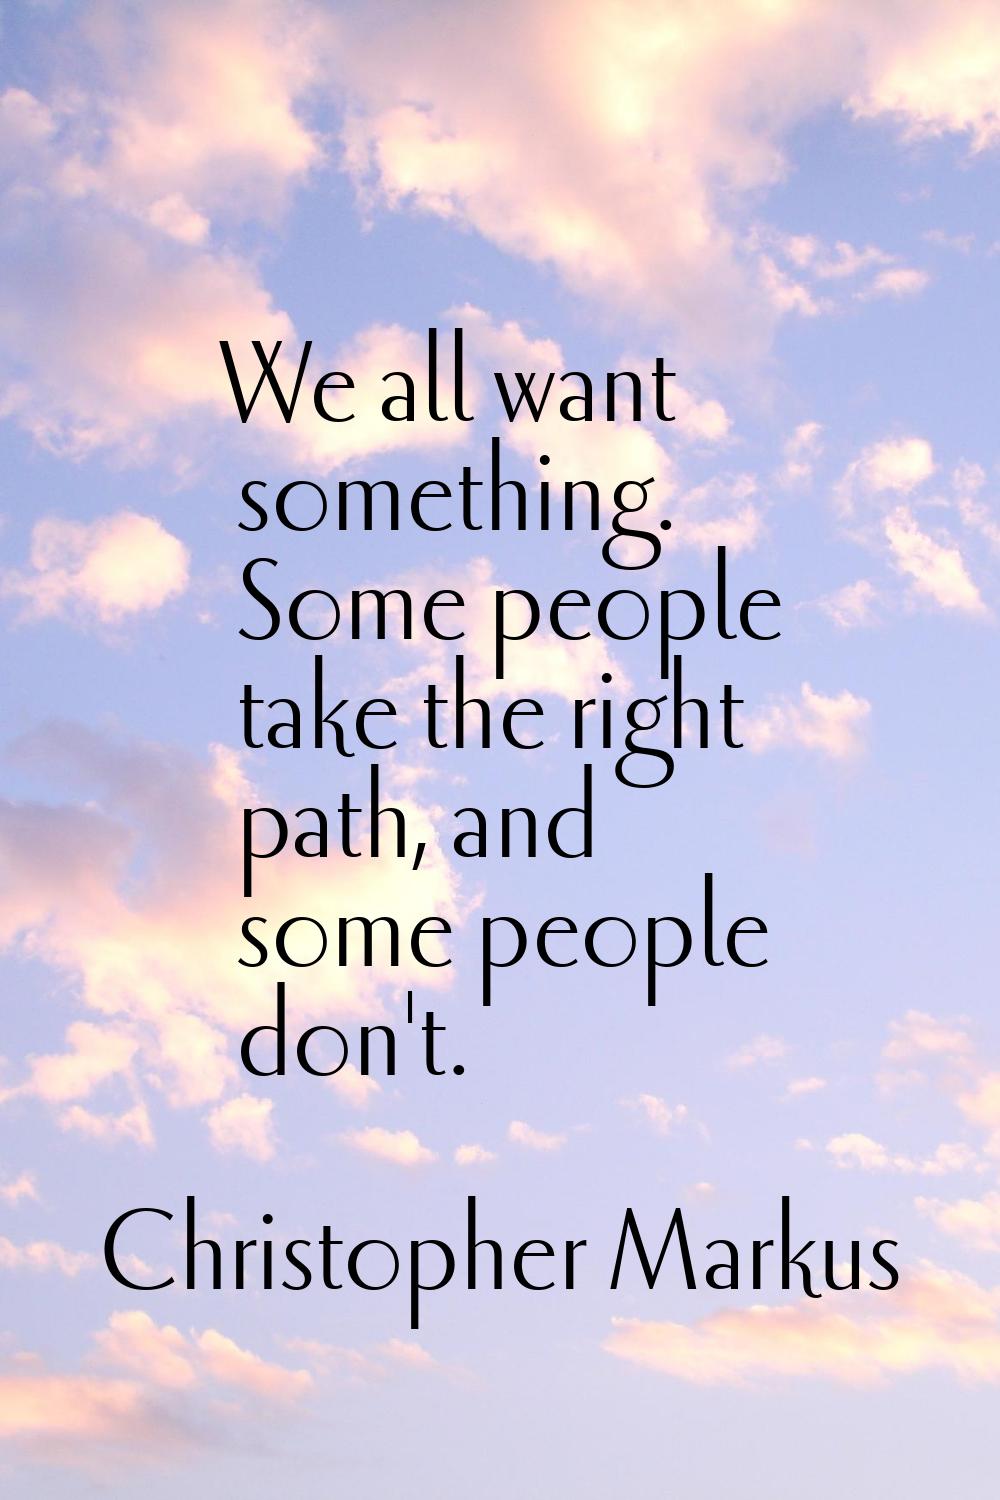 We all want something. Some people take the right path, and some people don't.